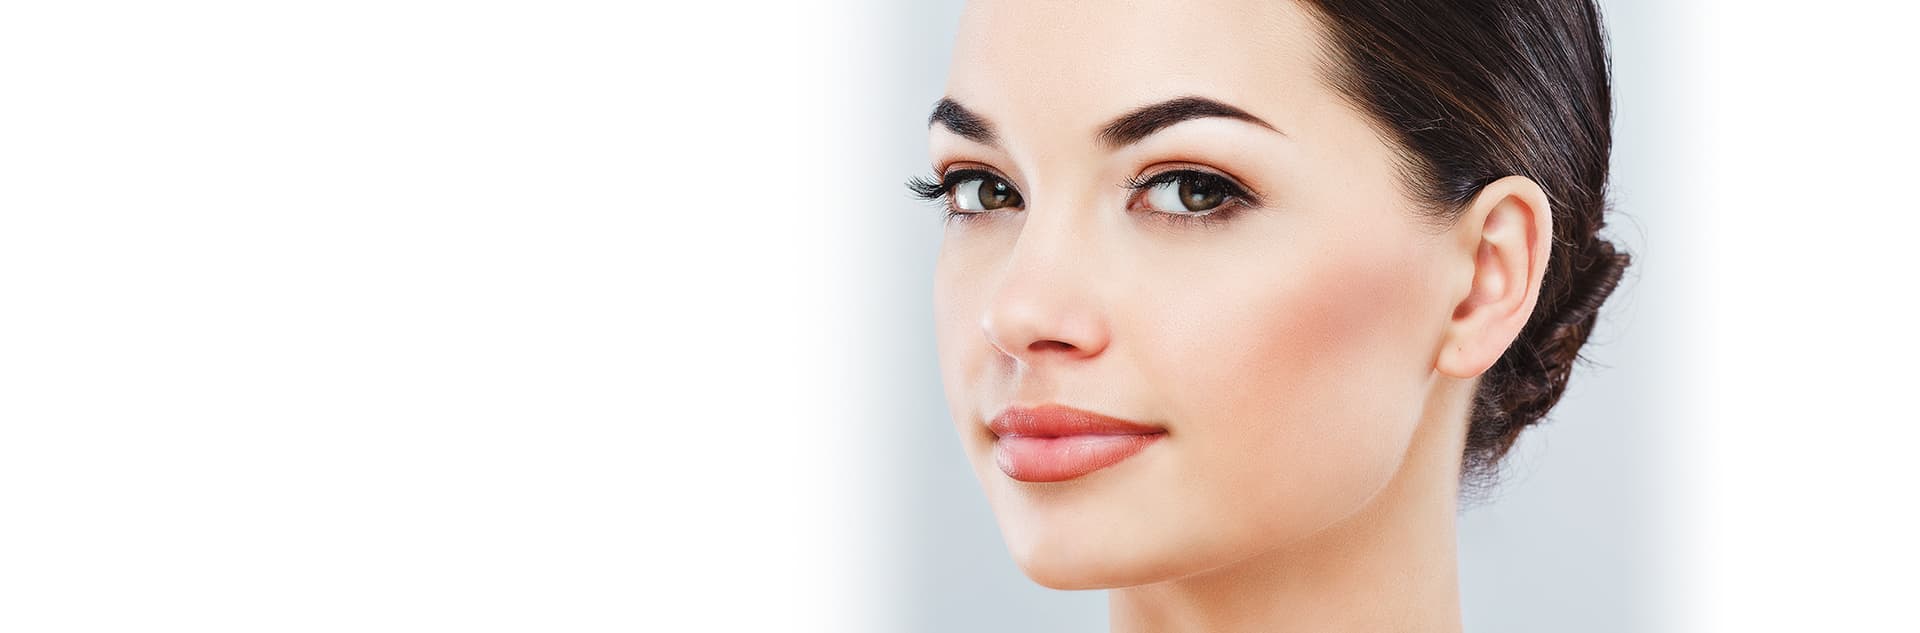 Reasons to choose Dr. Urban for your Facial Cosmetic Surgery